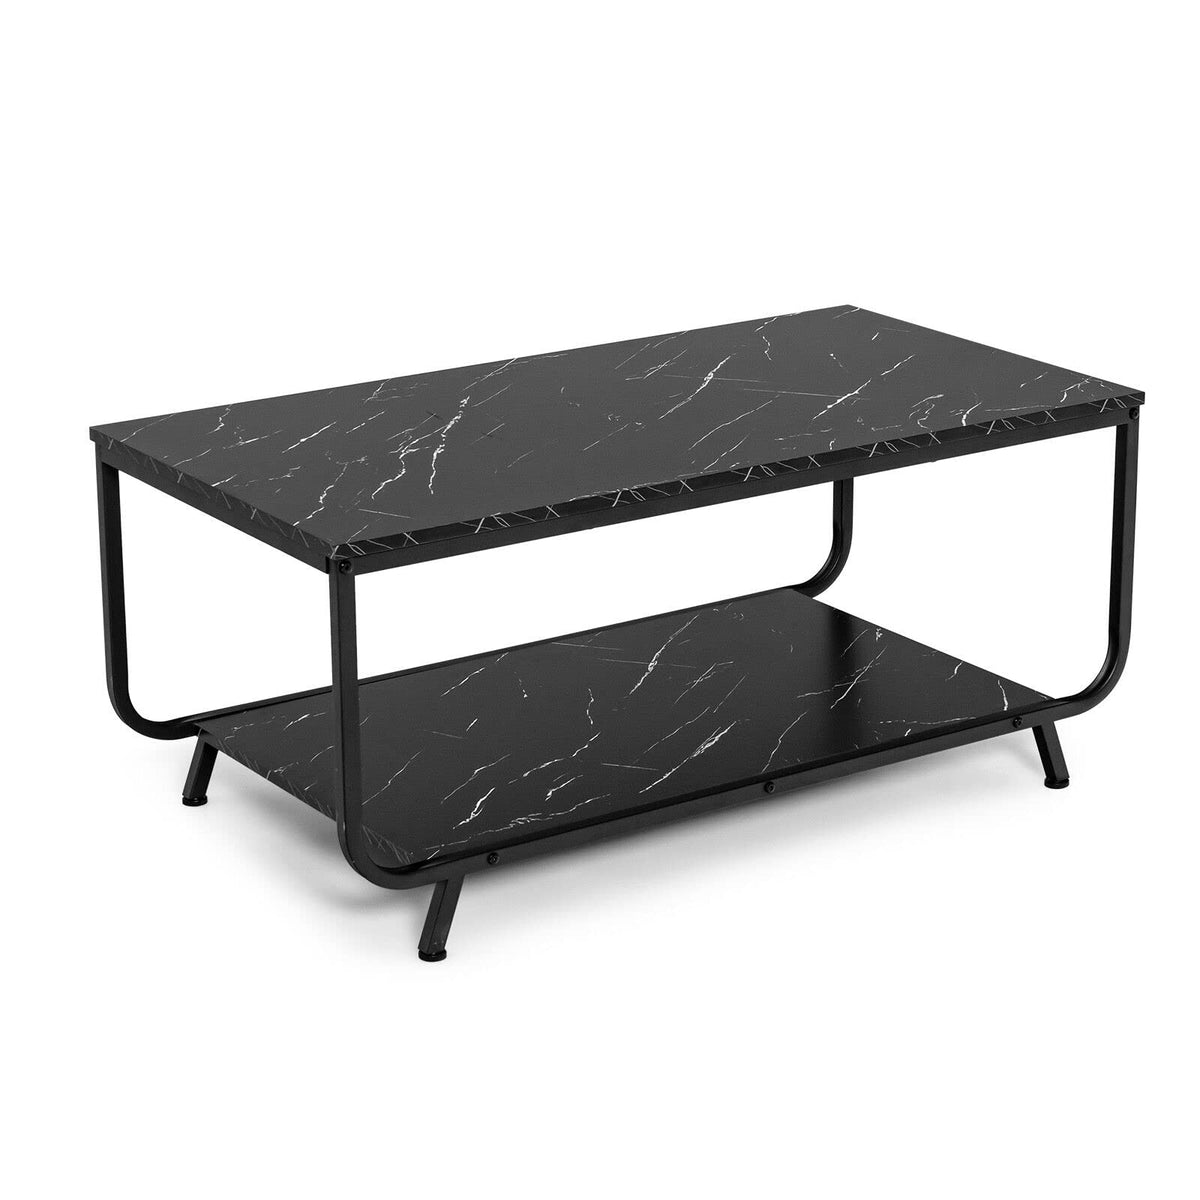 Giantex Marble Coffee Table, Modern Faux Marble Top Coffee Table w/Metal Frame